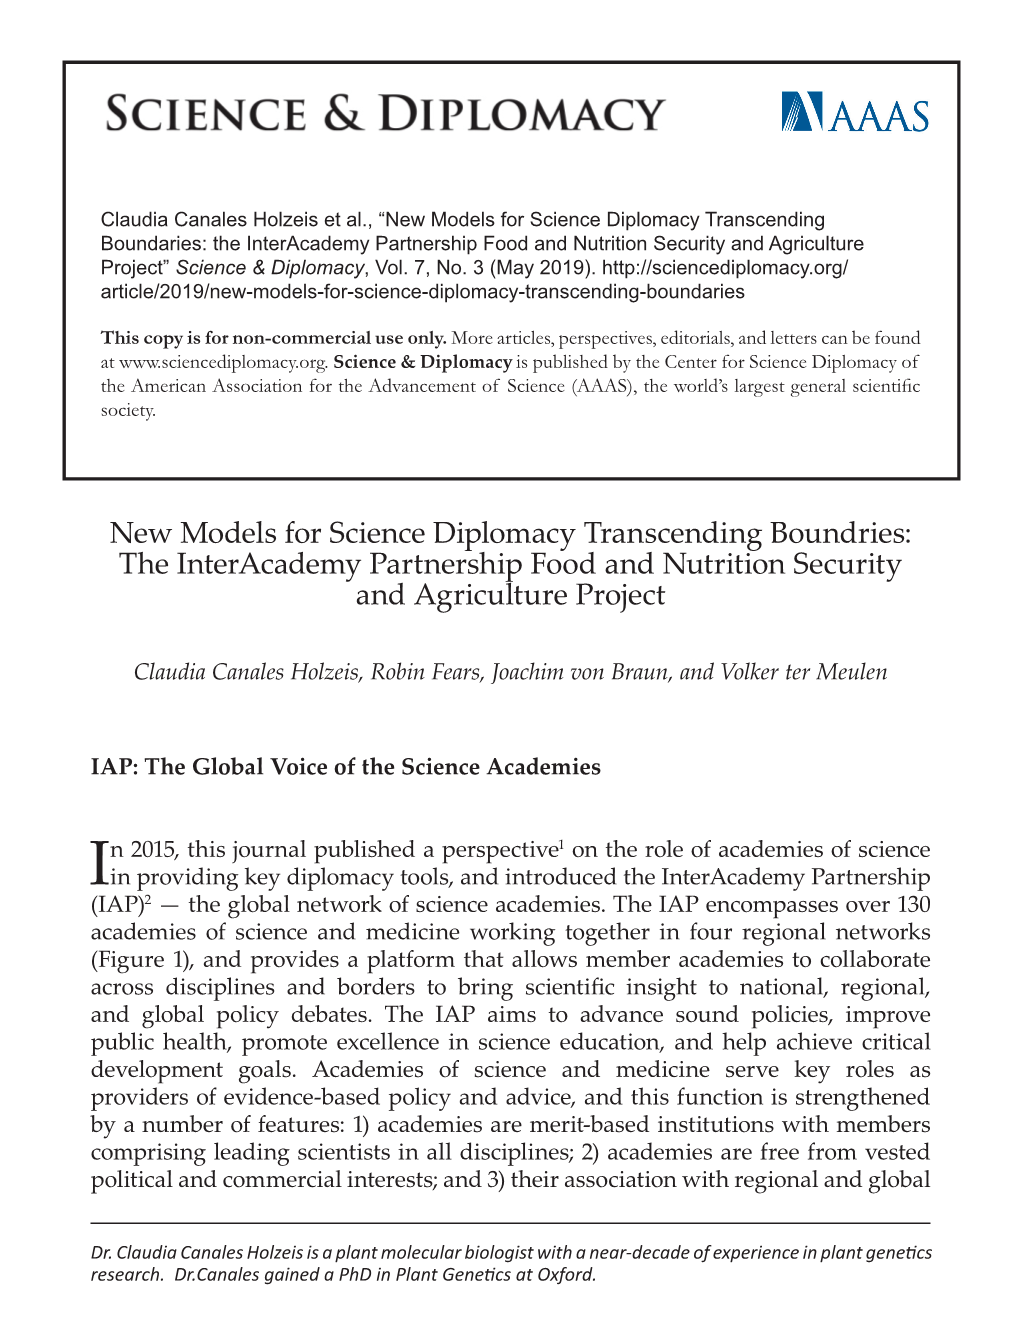 New Models for Science Diplomacy Transcending Boundaries: the Interacademy Partnership Food and Nutrition Security and Agriculture Project” Science & Diplomacy, Vol